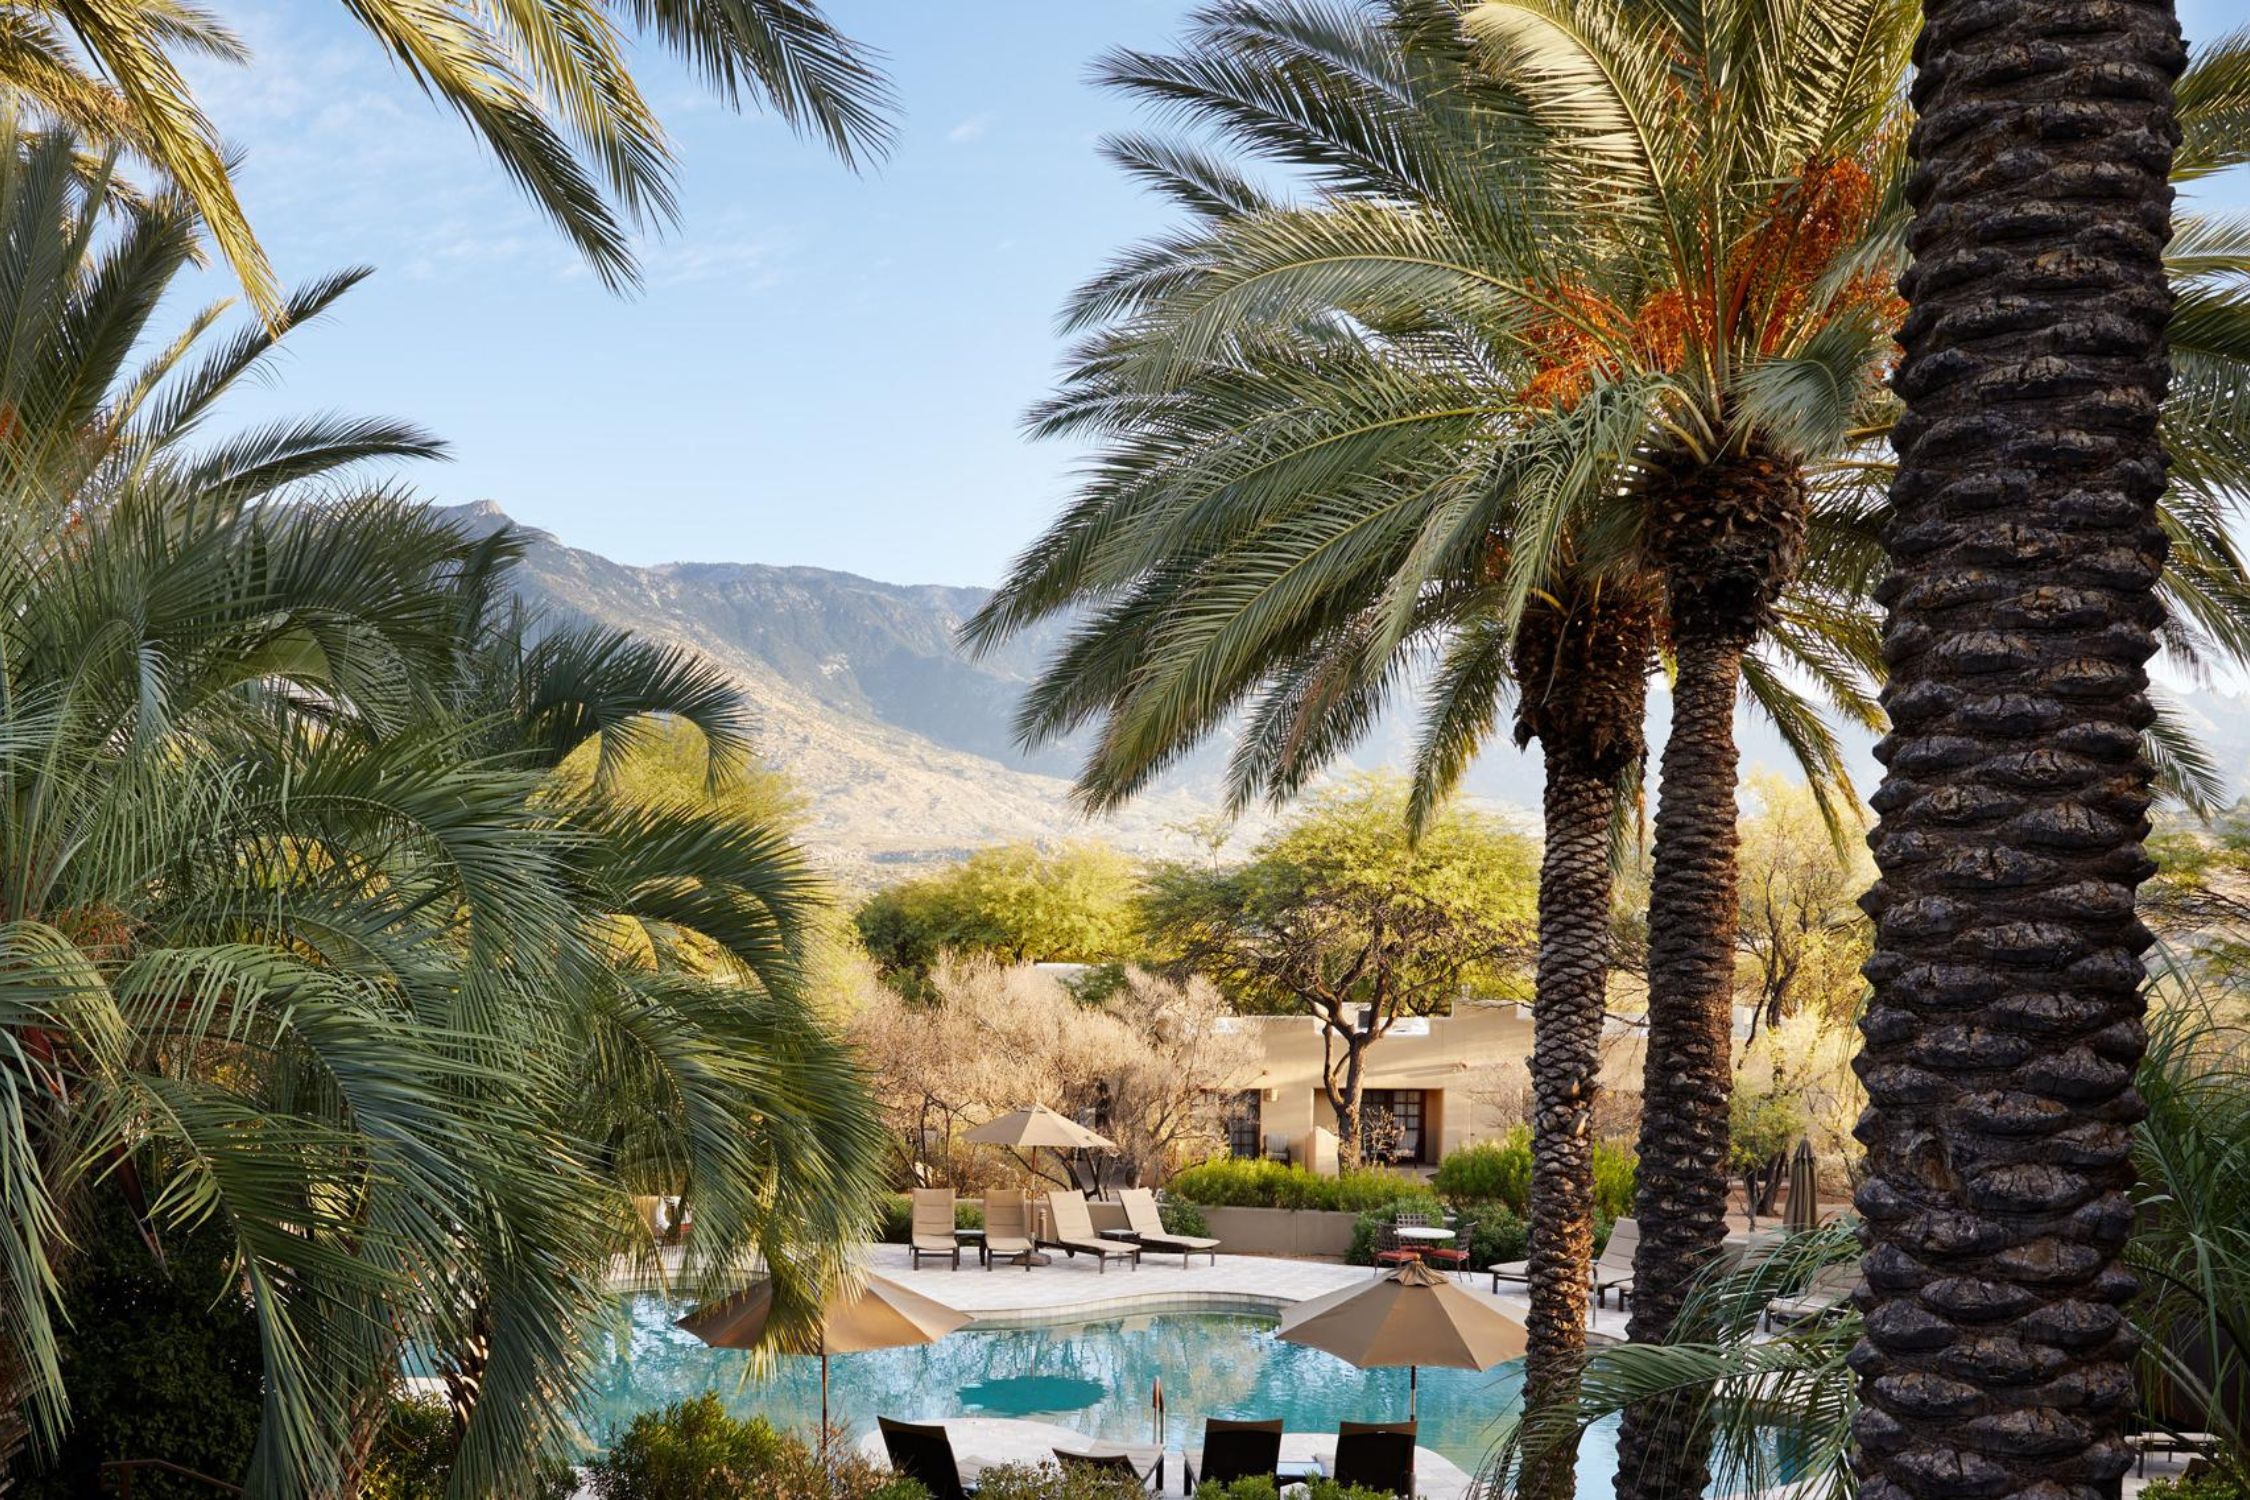 Scenic view of Sonoran mountains featuring public pool and palm trees.